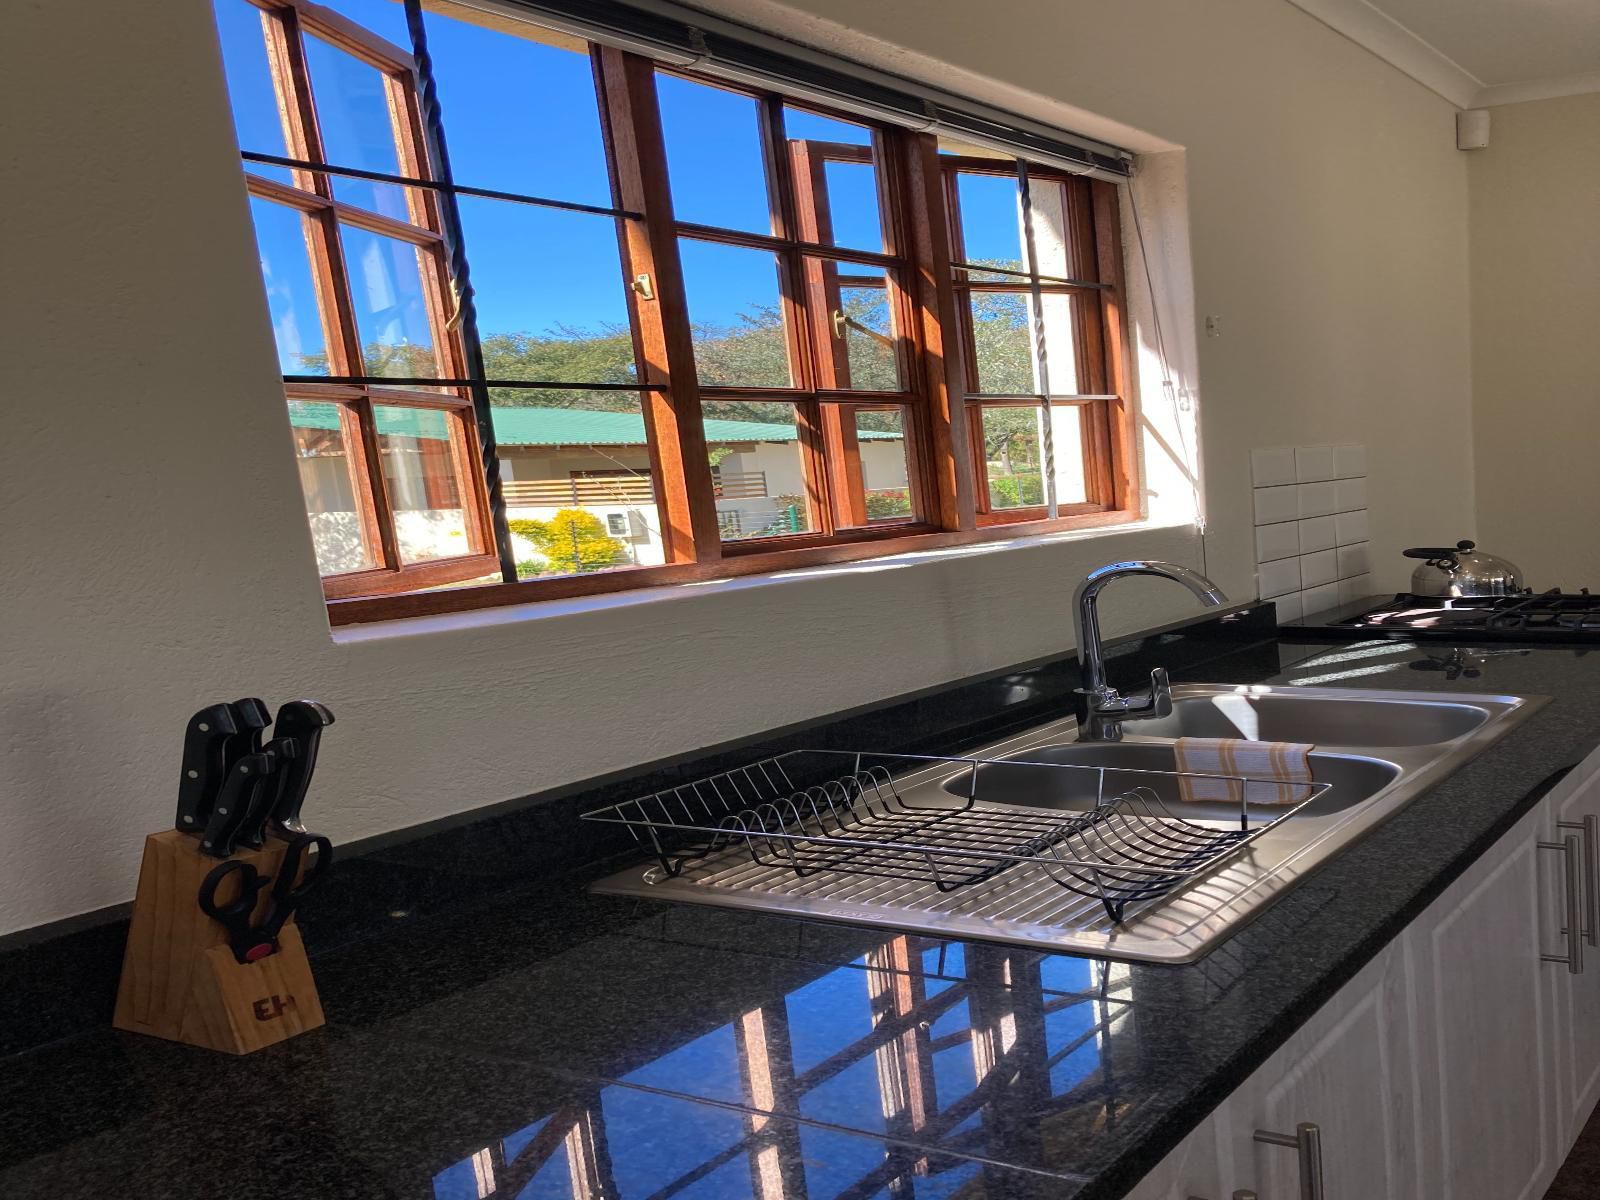 Bergdale Cottages Hazyview Mpumalanga South Africa Kitchen